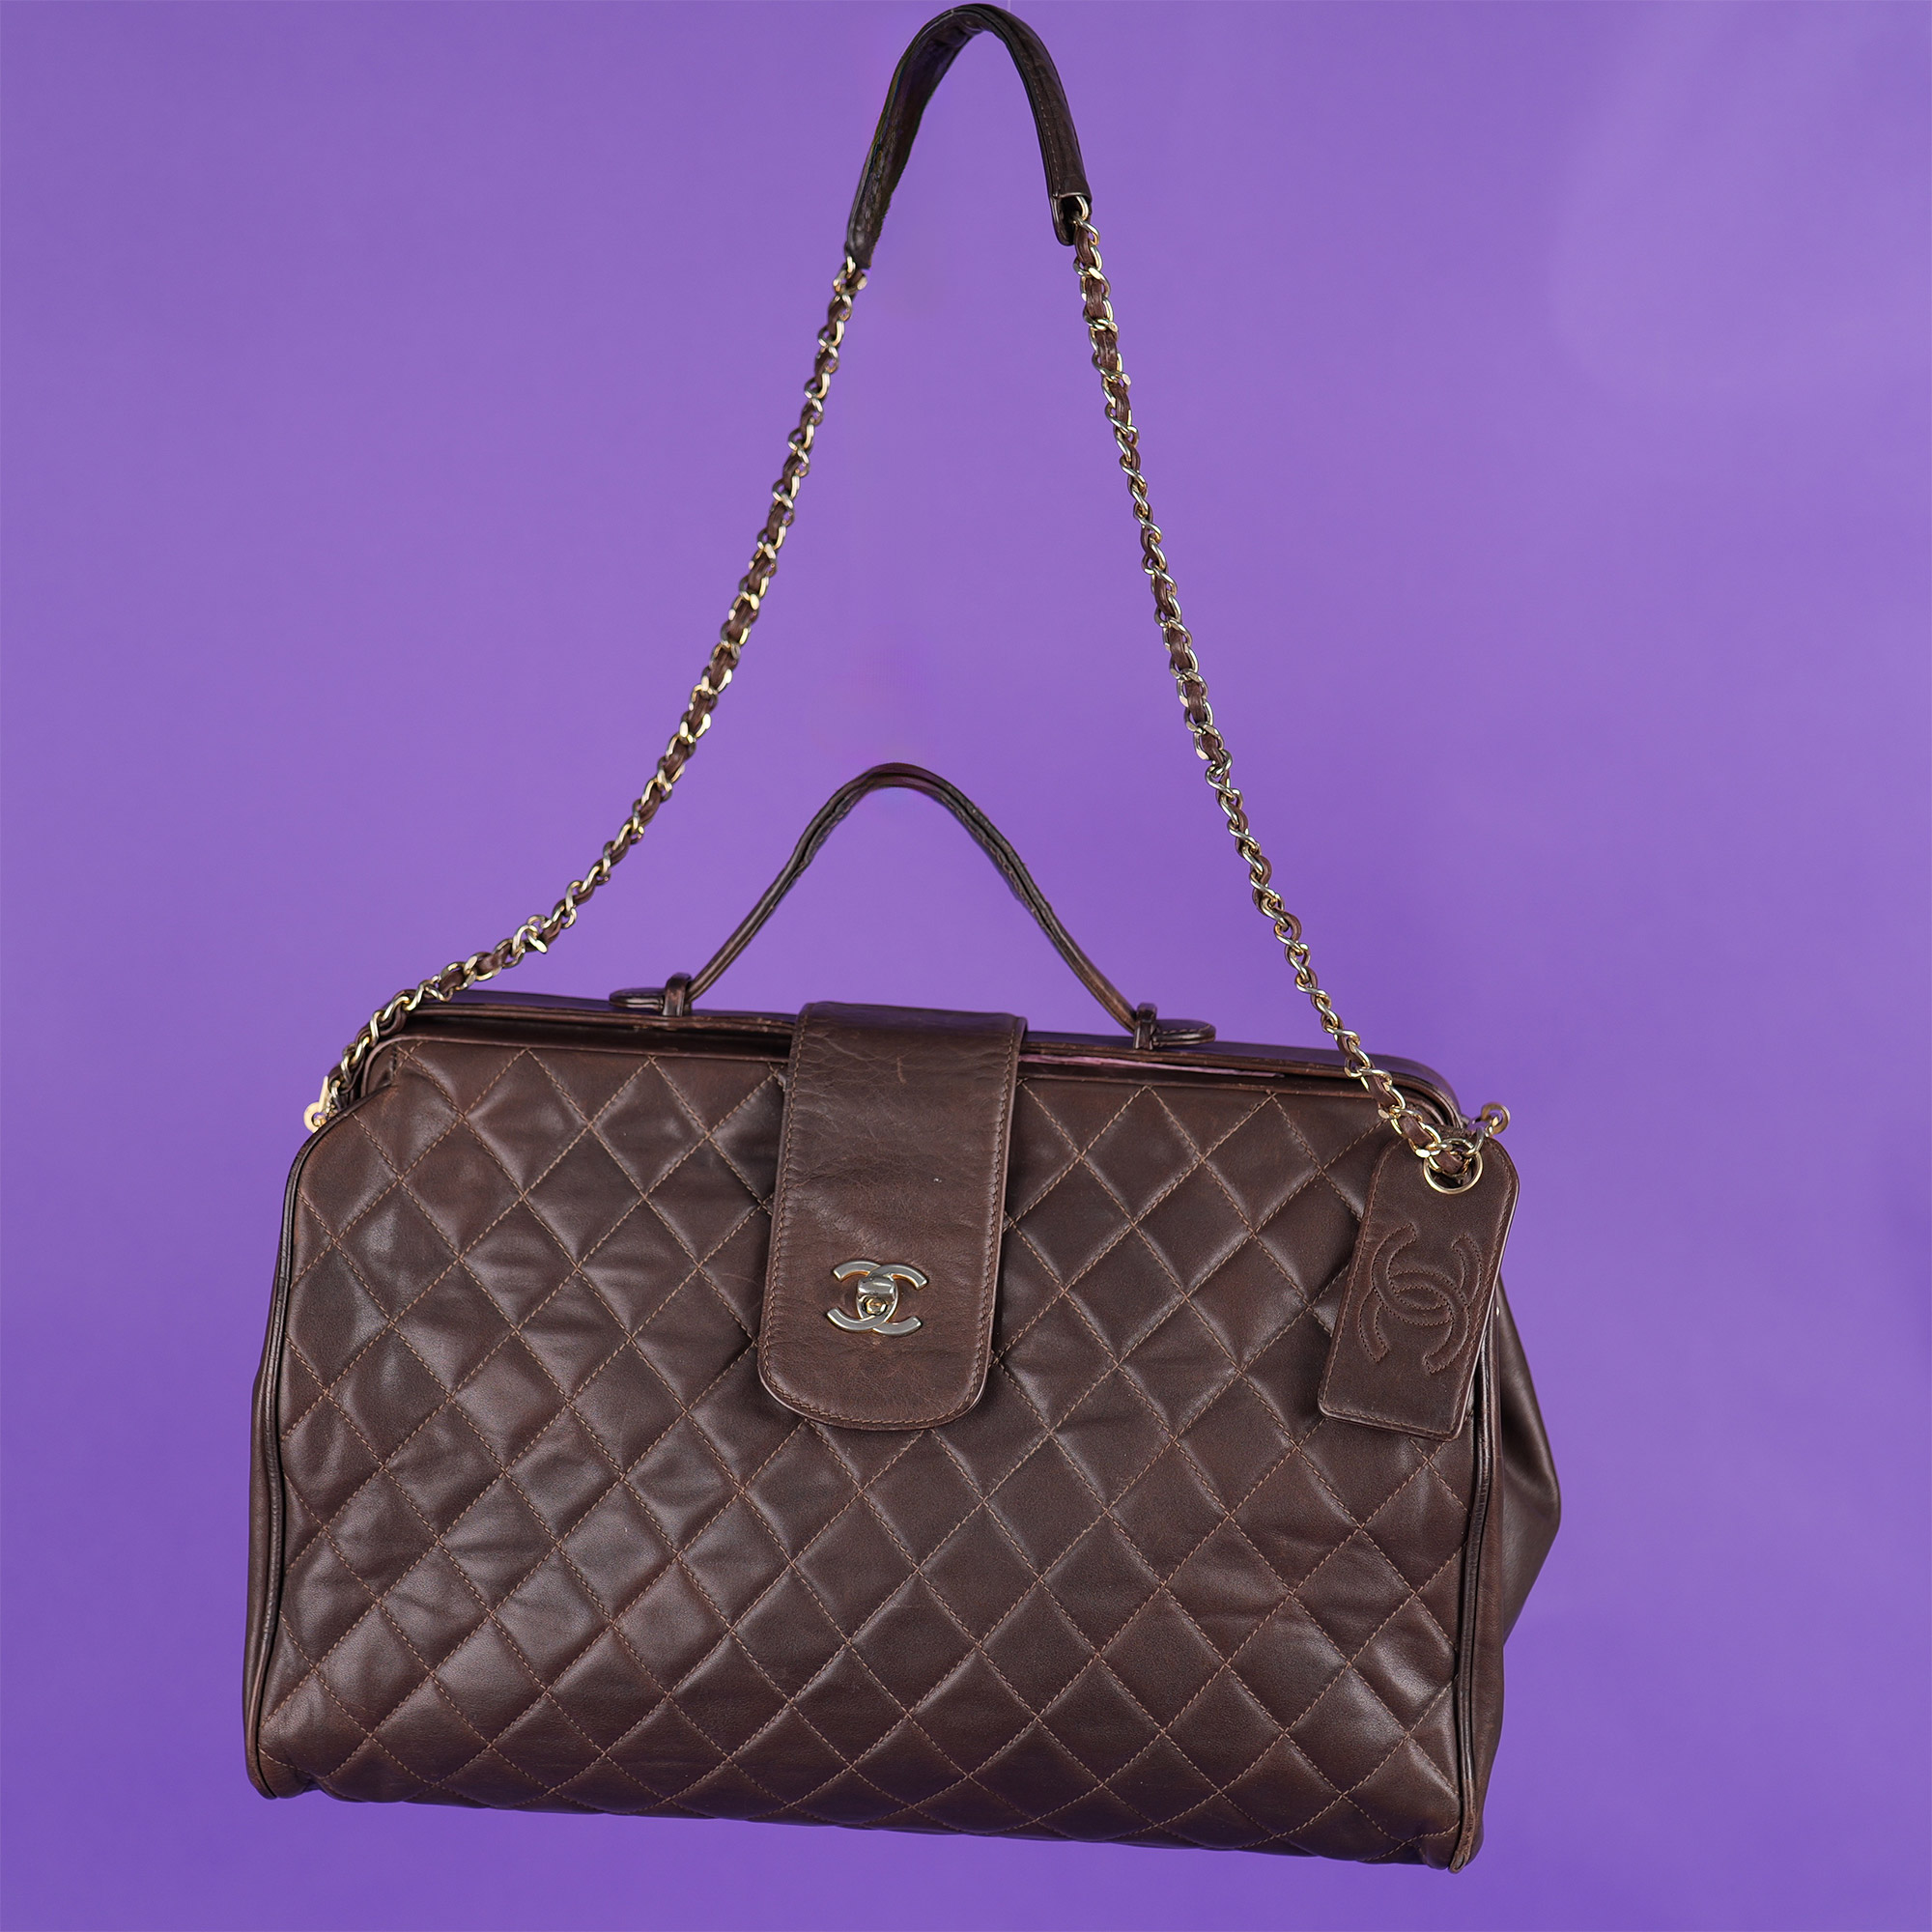 Authentic Chanel Brown Quilted Leather Large Doctor Bag - Image 8 of 13